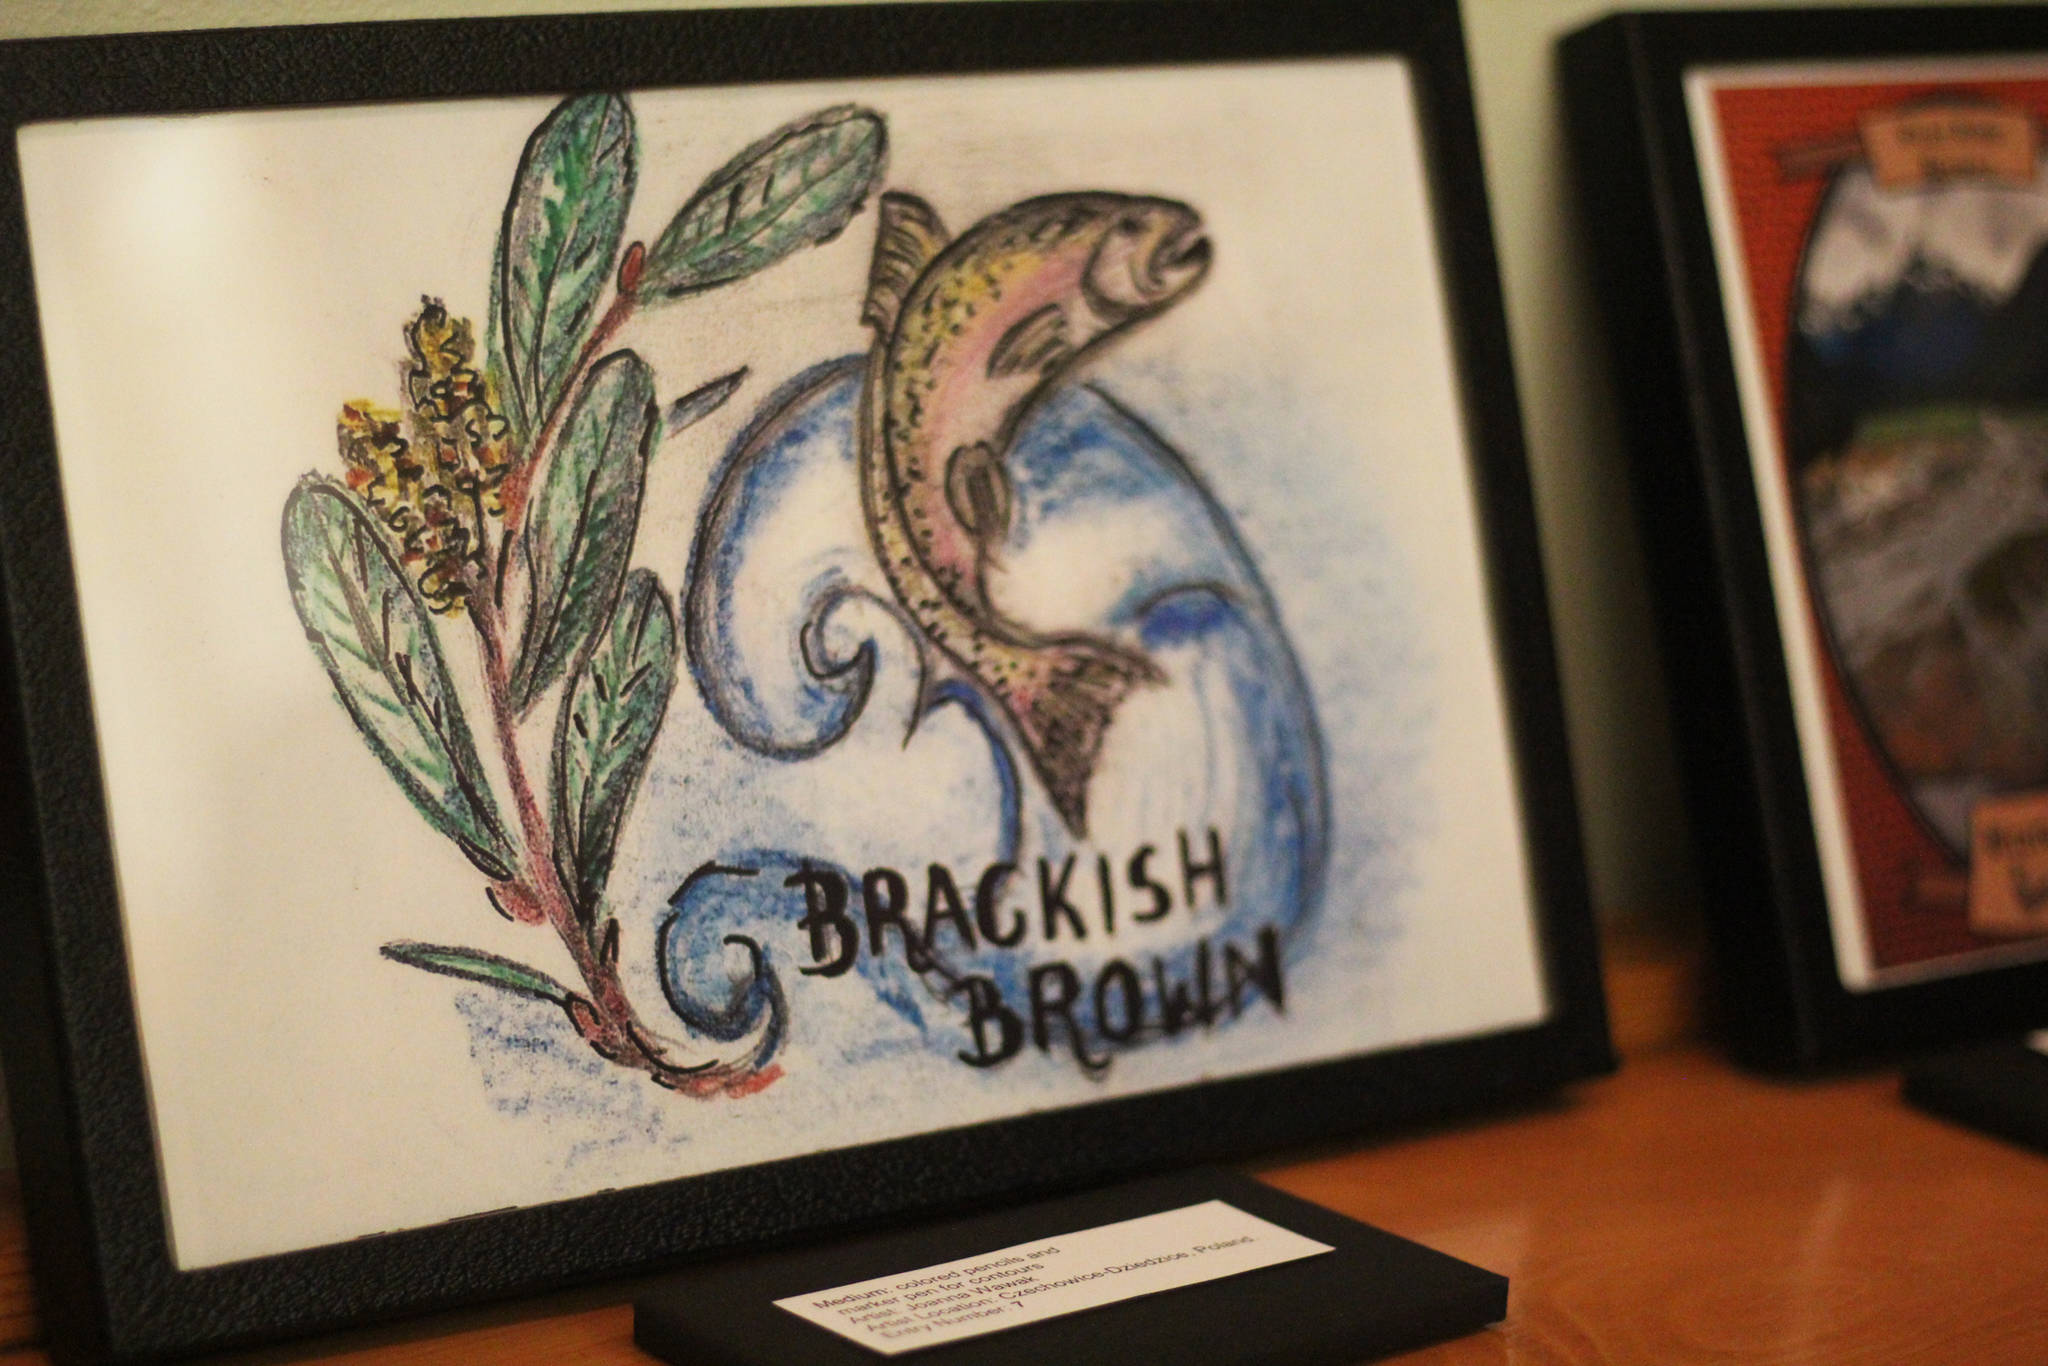 One of several beer label submissions sits on display Friday, Feb. 1, 2019 at a First Friday event at Grace Ridge Brewery in Homer, Alaska. The Brackish Brown ale, bottled with the winning label, was available at the event. (Photo by Megan Pacer/Homer News)